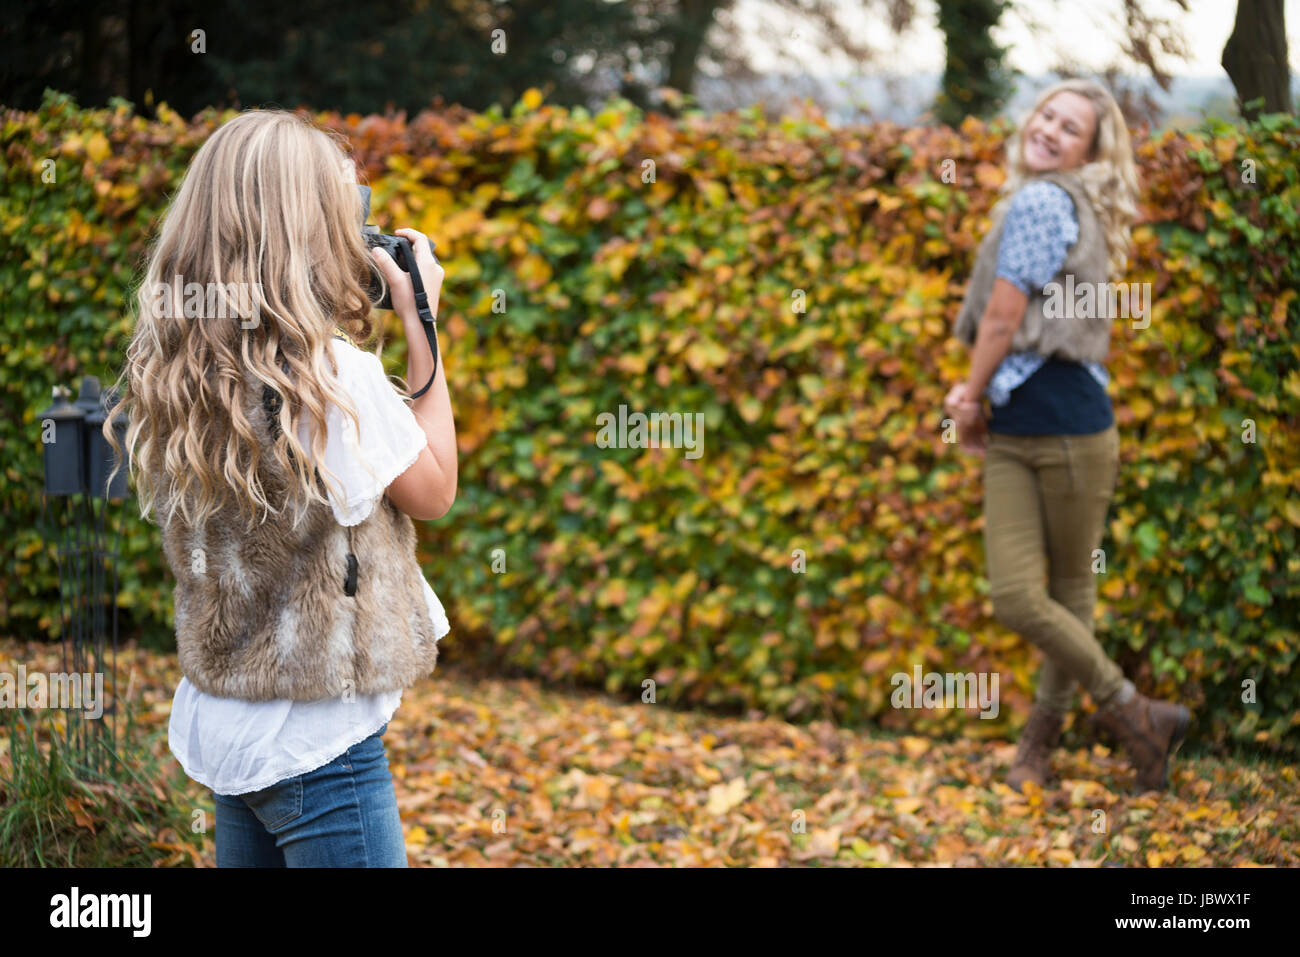 Girl photographing sister by autumn garden hedge Stock Photo